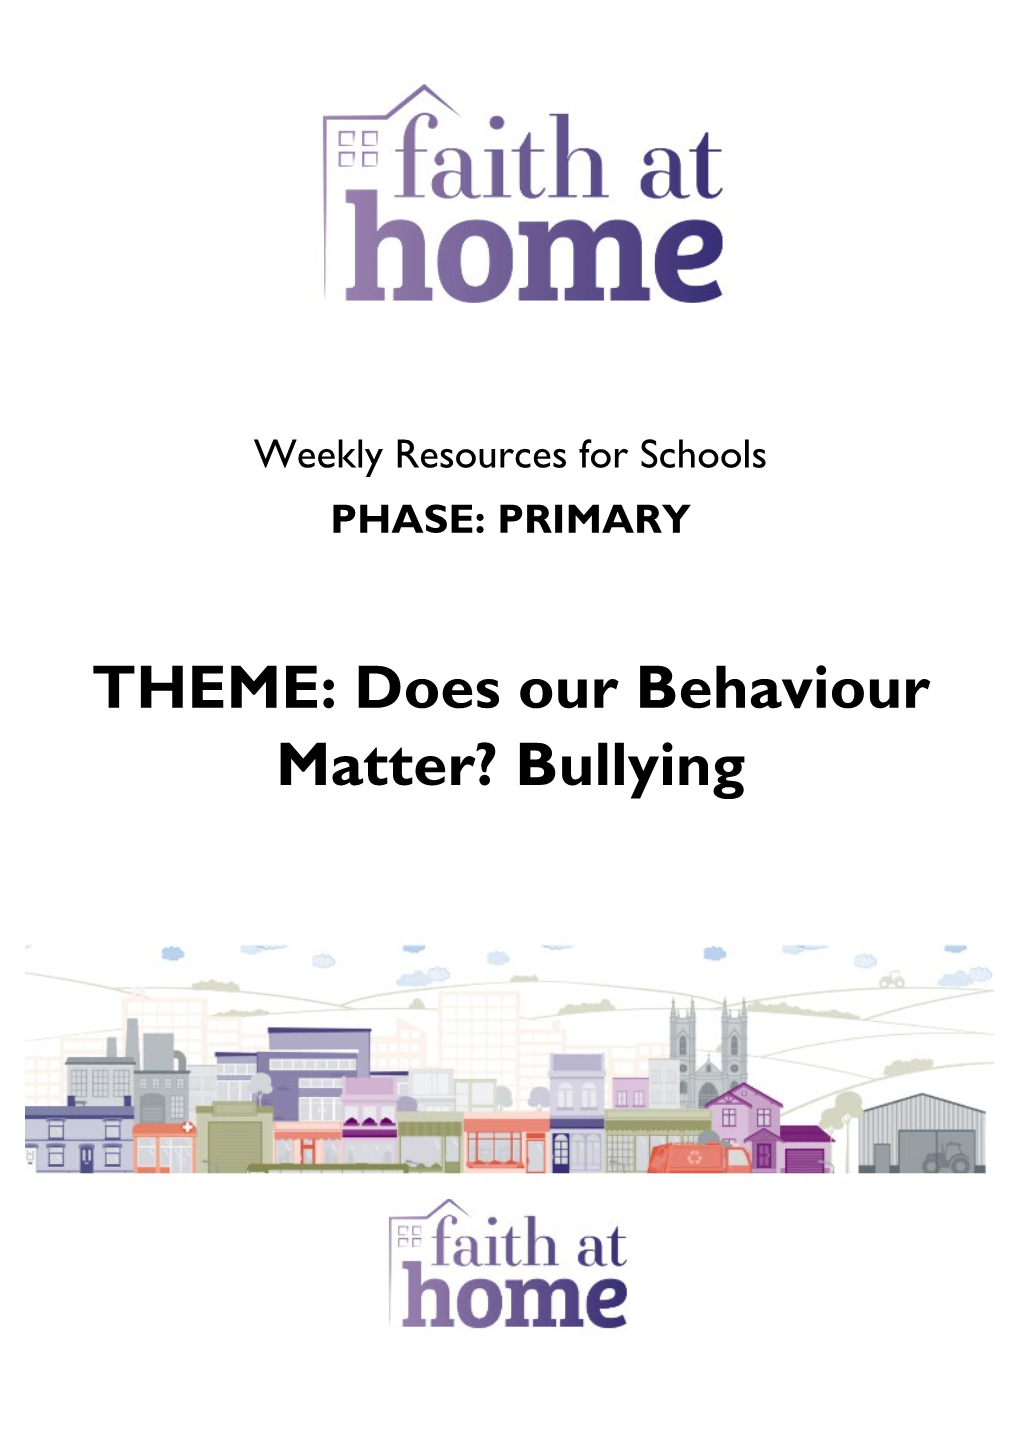 THEME: Does Our Behaviour Matter? Bullying